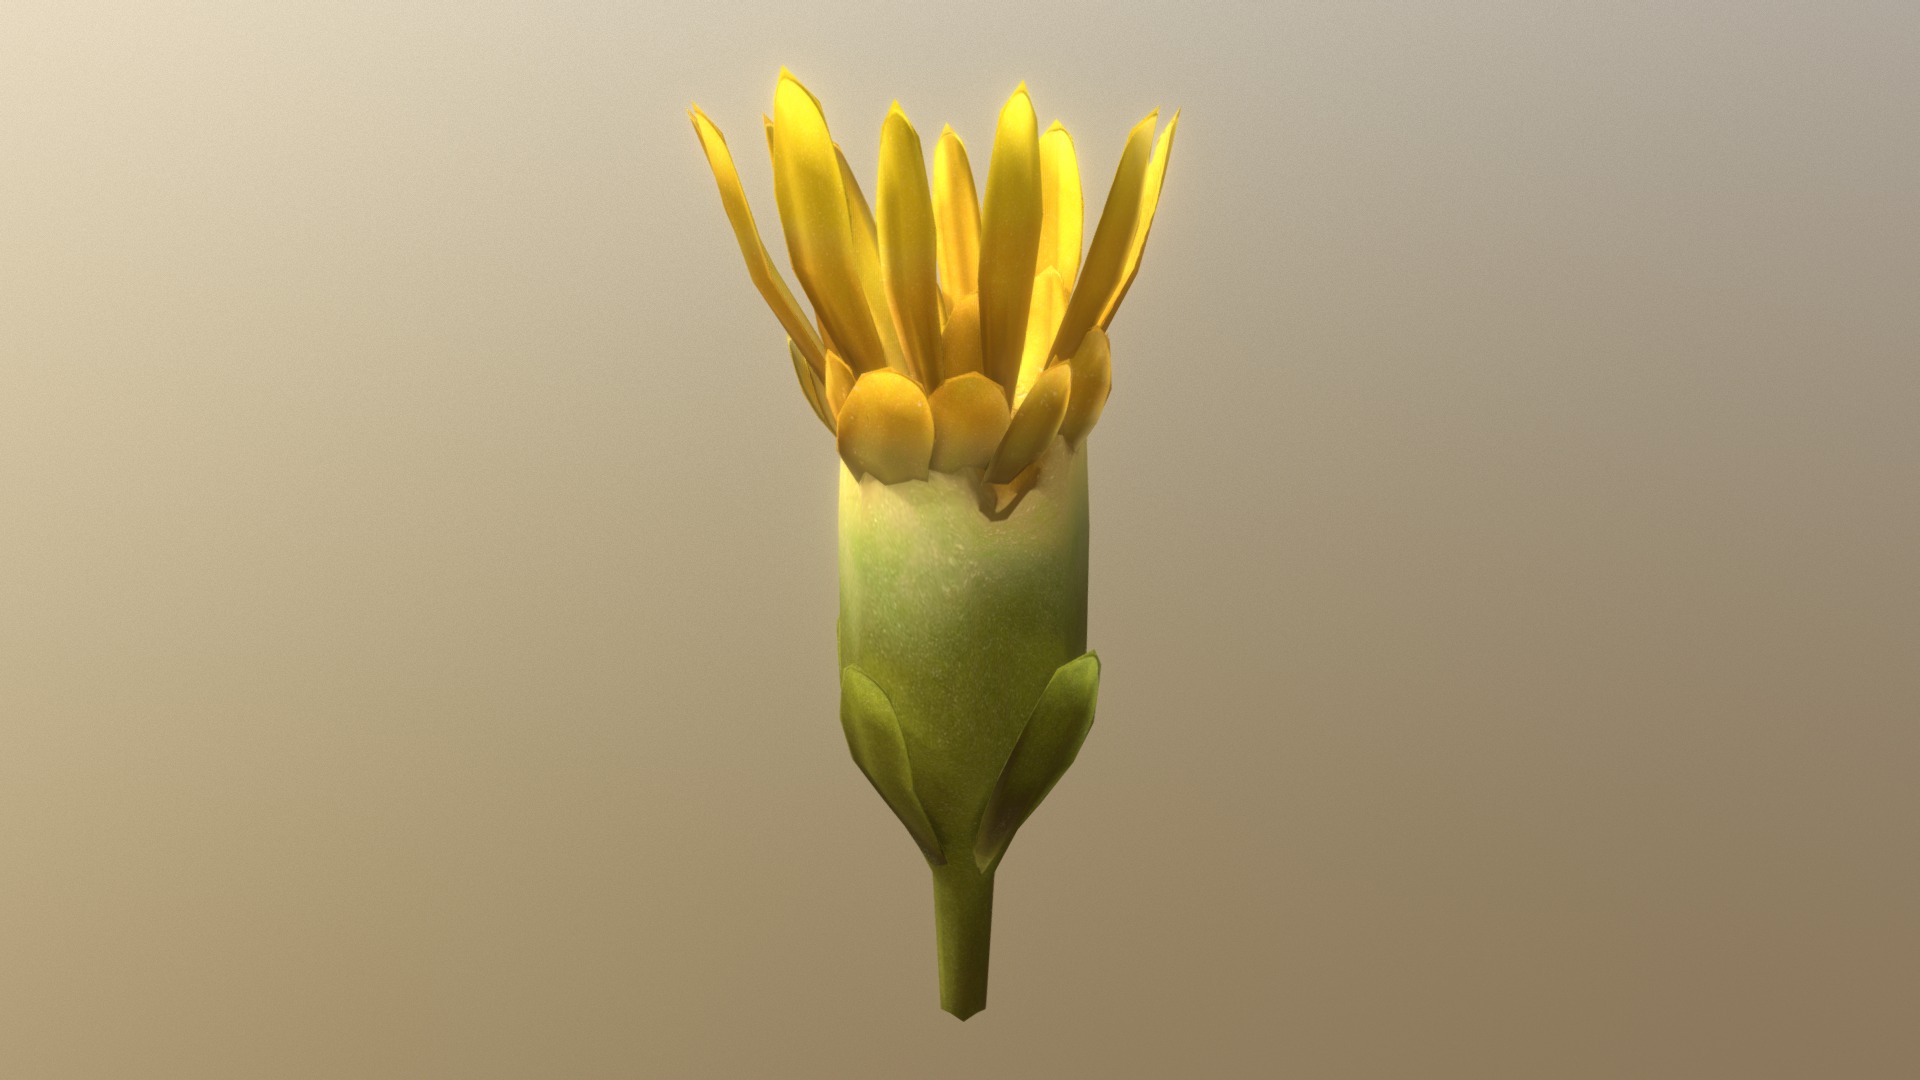 3D model Goldenrod Blossom - This is a 3D model of the Goldenrod Blossom. The 3D model is about a yellow flower with green leaves.